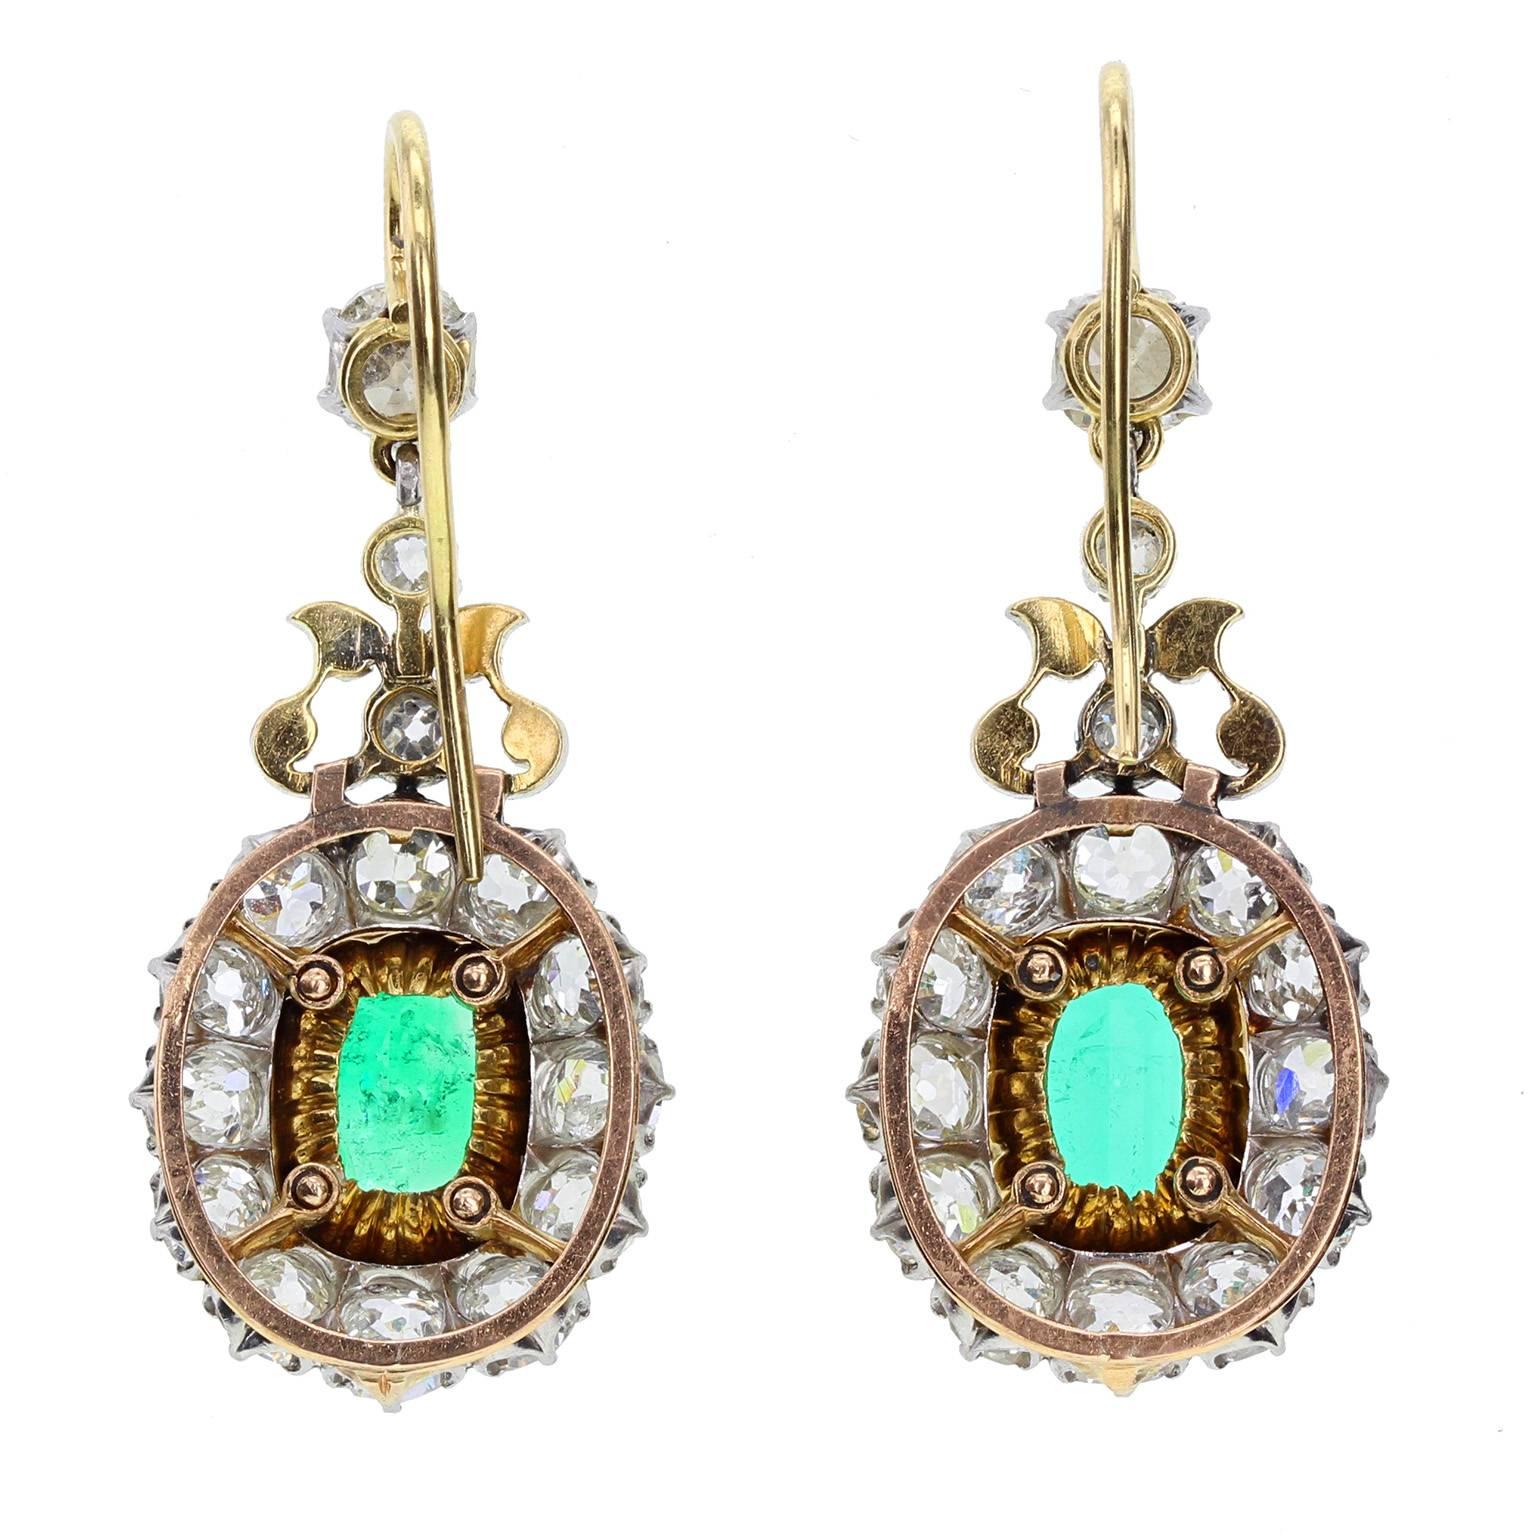 A fine and impressive pair of emerald and diamond earrings circa 1900. Each featuring a large emerald-cut emerald mounted in 18-carat gold claws, surrounded by 12 old mine-cut diamonds to form an oval cluster. Topped with a trefoil style, pierced